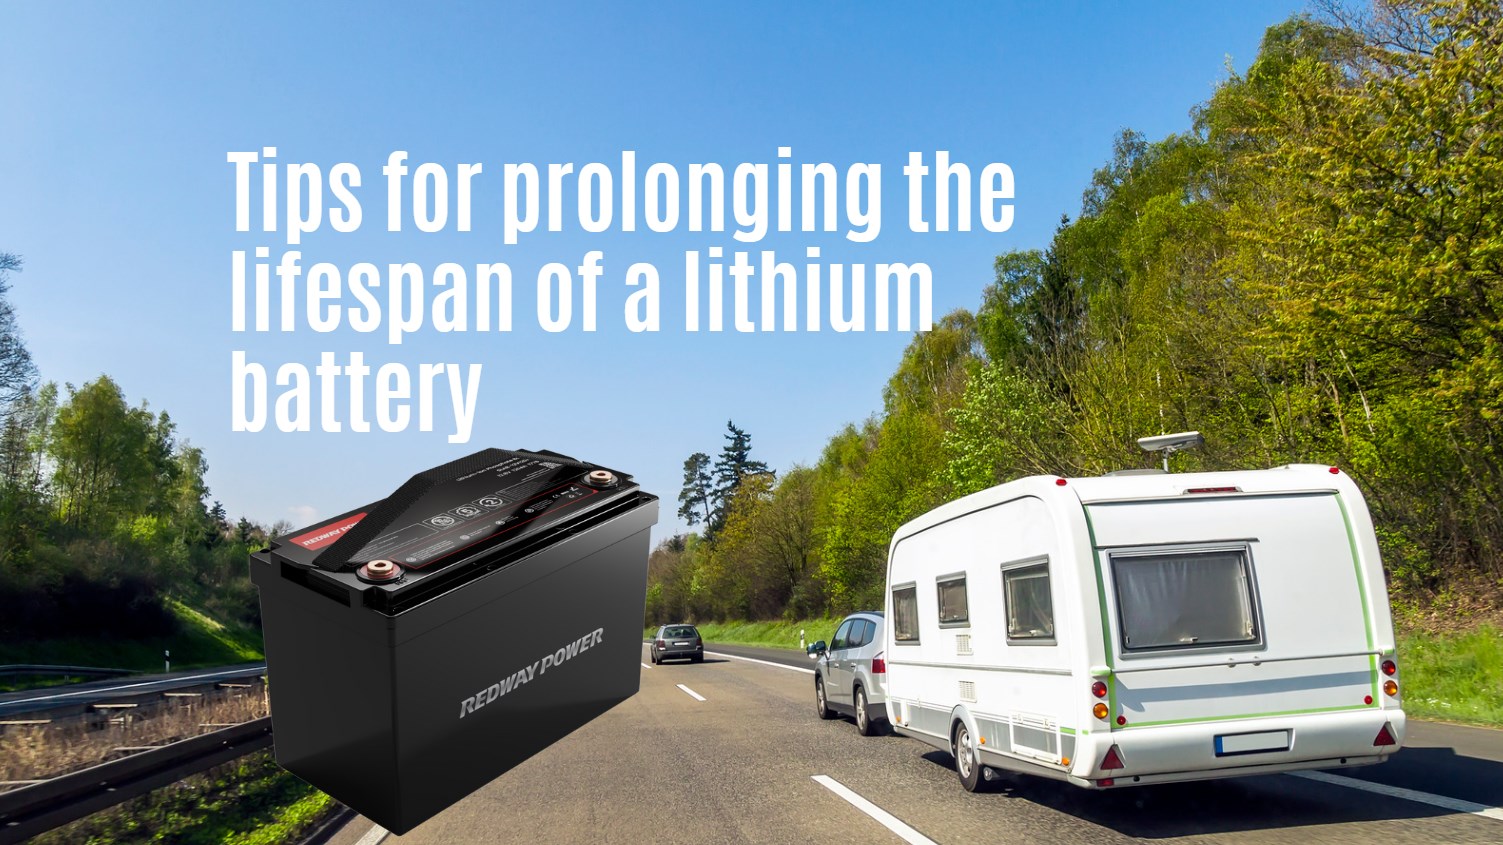 Tips for prolonging the lifespan of a lithium battery